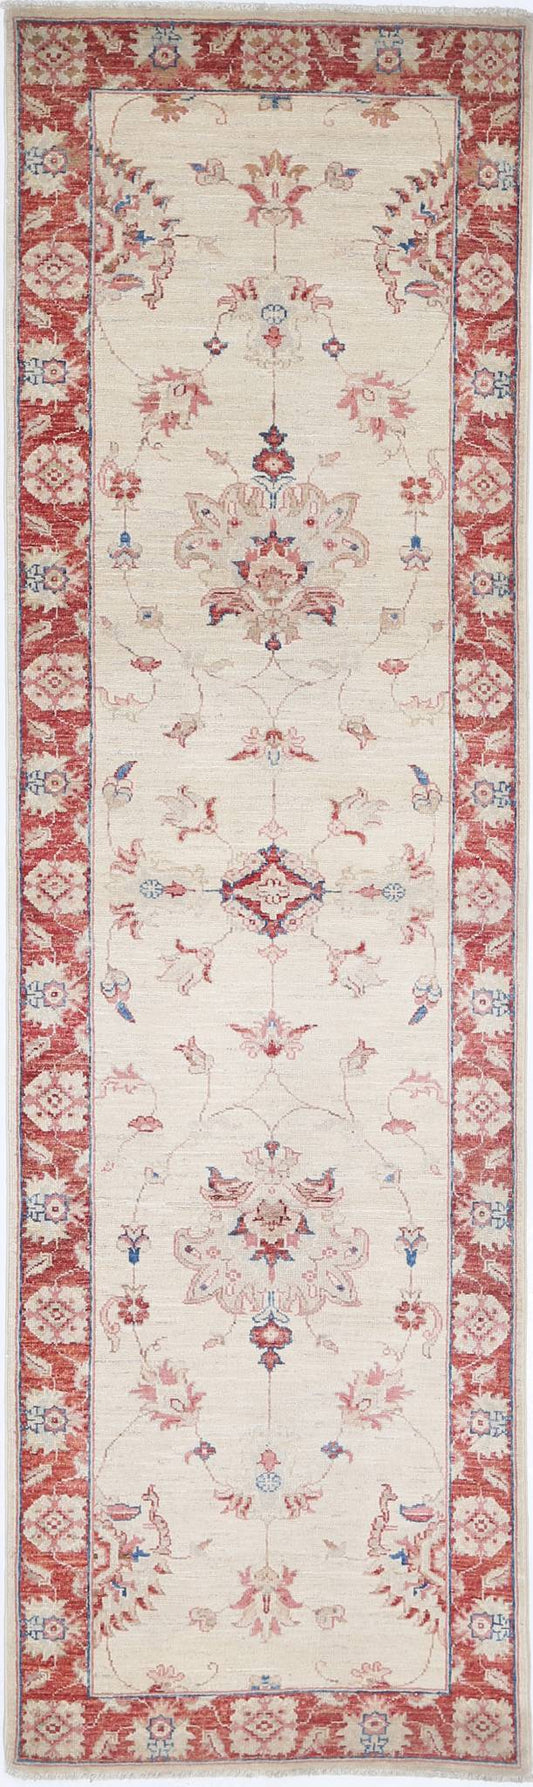 Traditional Hand Knotted Ziegler Farhan Wool Rug of Size 2'5'' X 8'7'' in Ivory and Red Colors - Made in Afghanistan